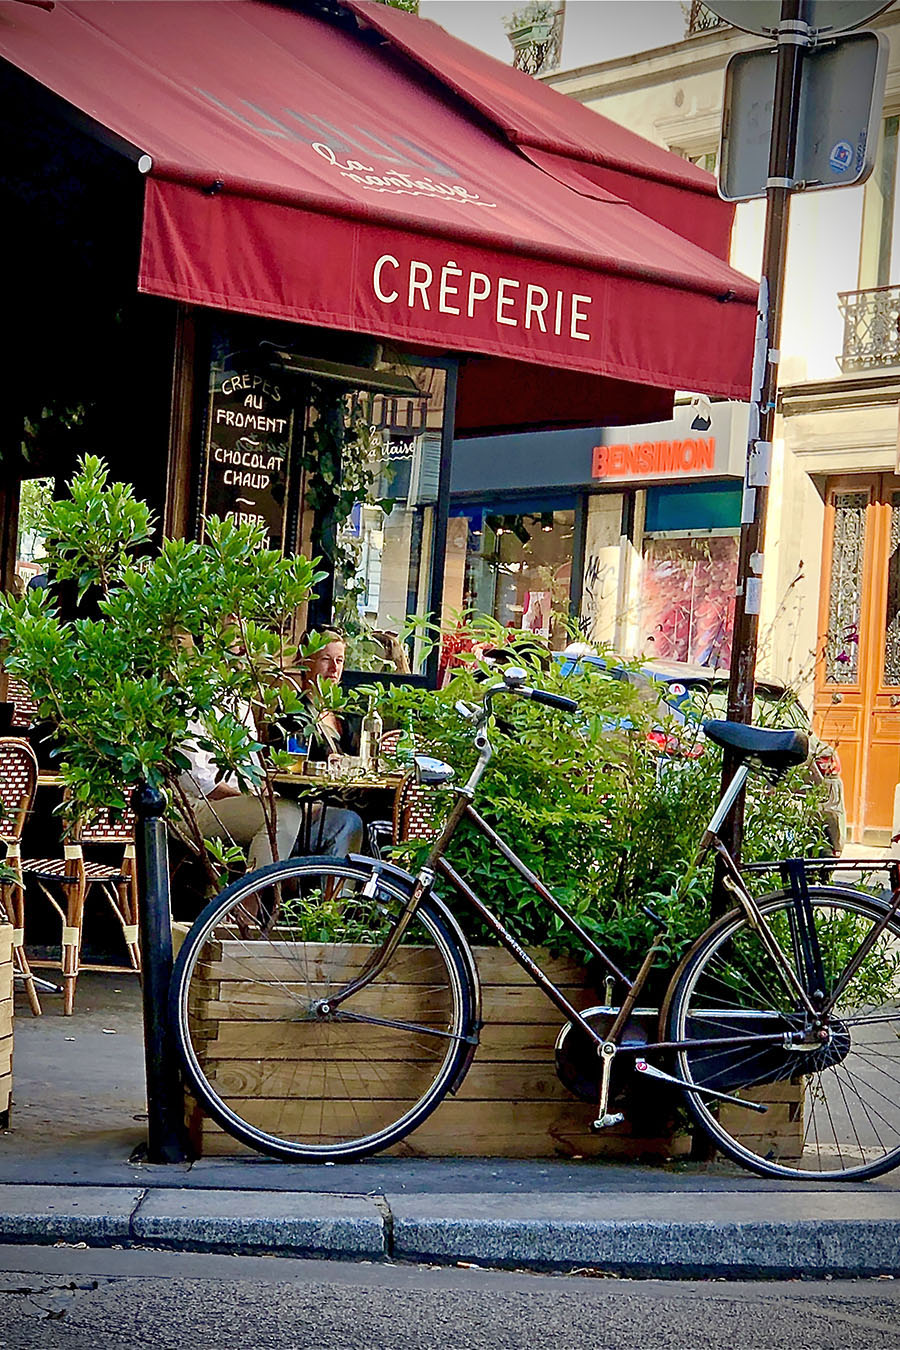 In front of 'Lulu la Nantaise,' a creperie in Paris, with a bicycle parked on the sidewalk. ©2019 Mathieu Improvisato